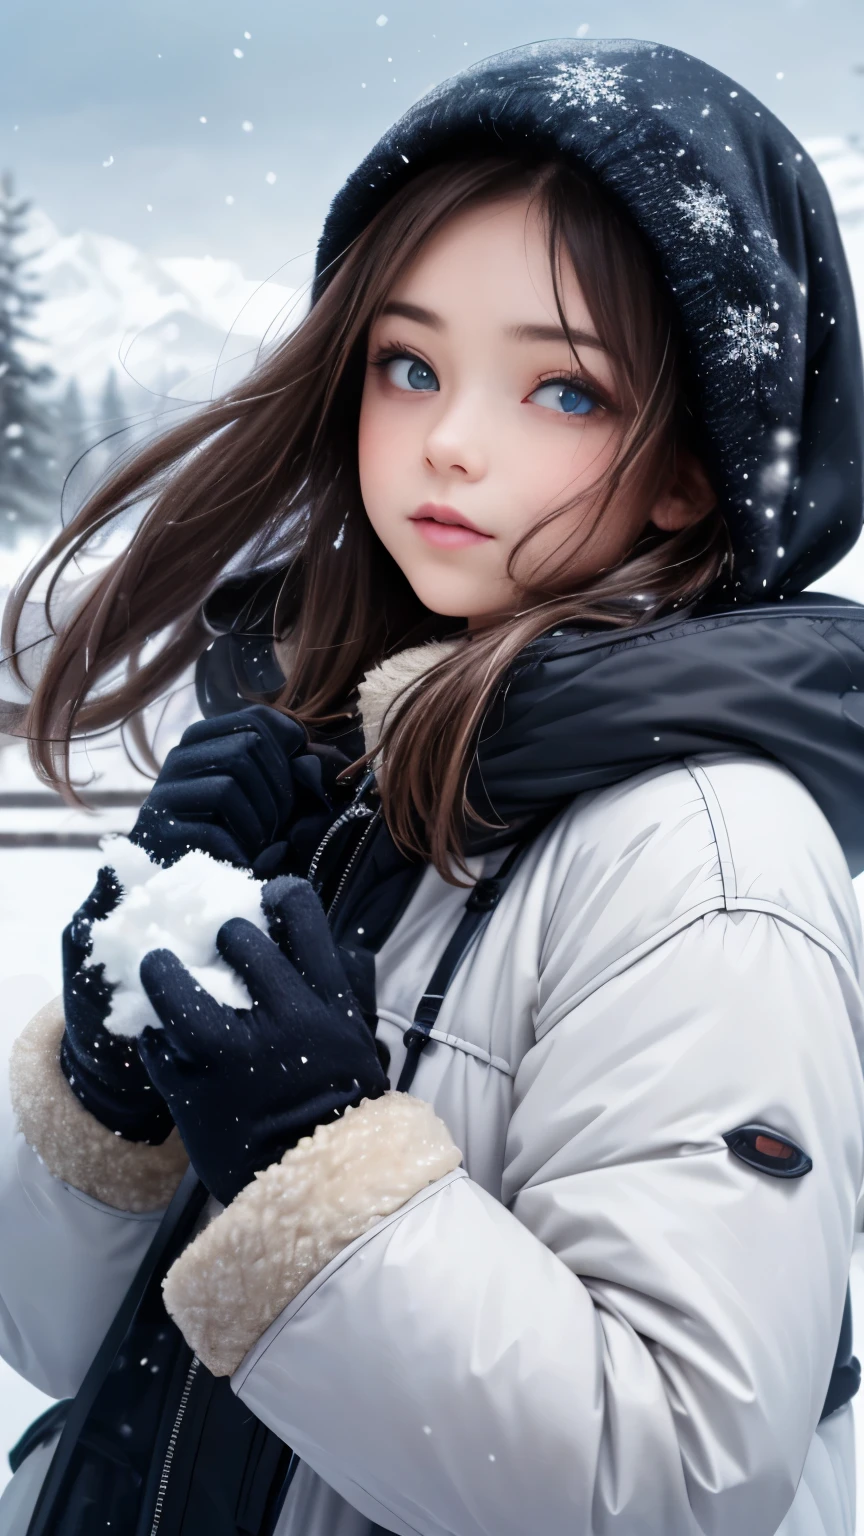 A girl in a snowy landscape, with a fierce wind blowing against her face, creating a sense of motion. The wind brings a biting coldness, as snowflakes swirl in the air. The girl's face shows a mix of determination and annoyance, with flushed cheeks and rosy nose. Her eyes are blue and sharp, capturing the viewer's attention. Her lips are slightly chapped due to the cold weather. She is wearing a cozy winter coat, with a furry hood that partially covers her ears. The hood also has a hint of frost on it, emphasizing the freezing temperatures. The girl's hands are covered by gloves, with delicate snowflakes stitched on them. In the background, a snowy landscape stretches as far as the eye can see, with snow-covered trees and a distant mountain range. The colors are muted, with shades of white, blue, and gray dominating the scene. The lighting is soft and diffused, casting a gentle glow on the girl's face. The overall image is of high quality, with ultra-detailed snowflakes and realistic textures.